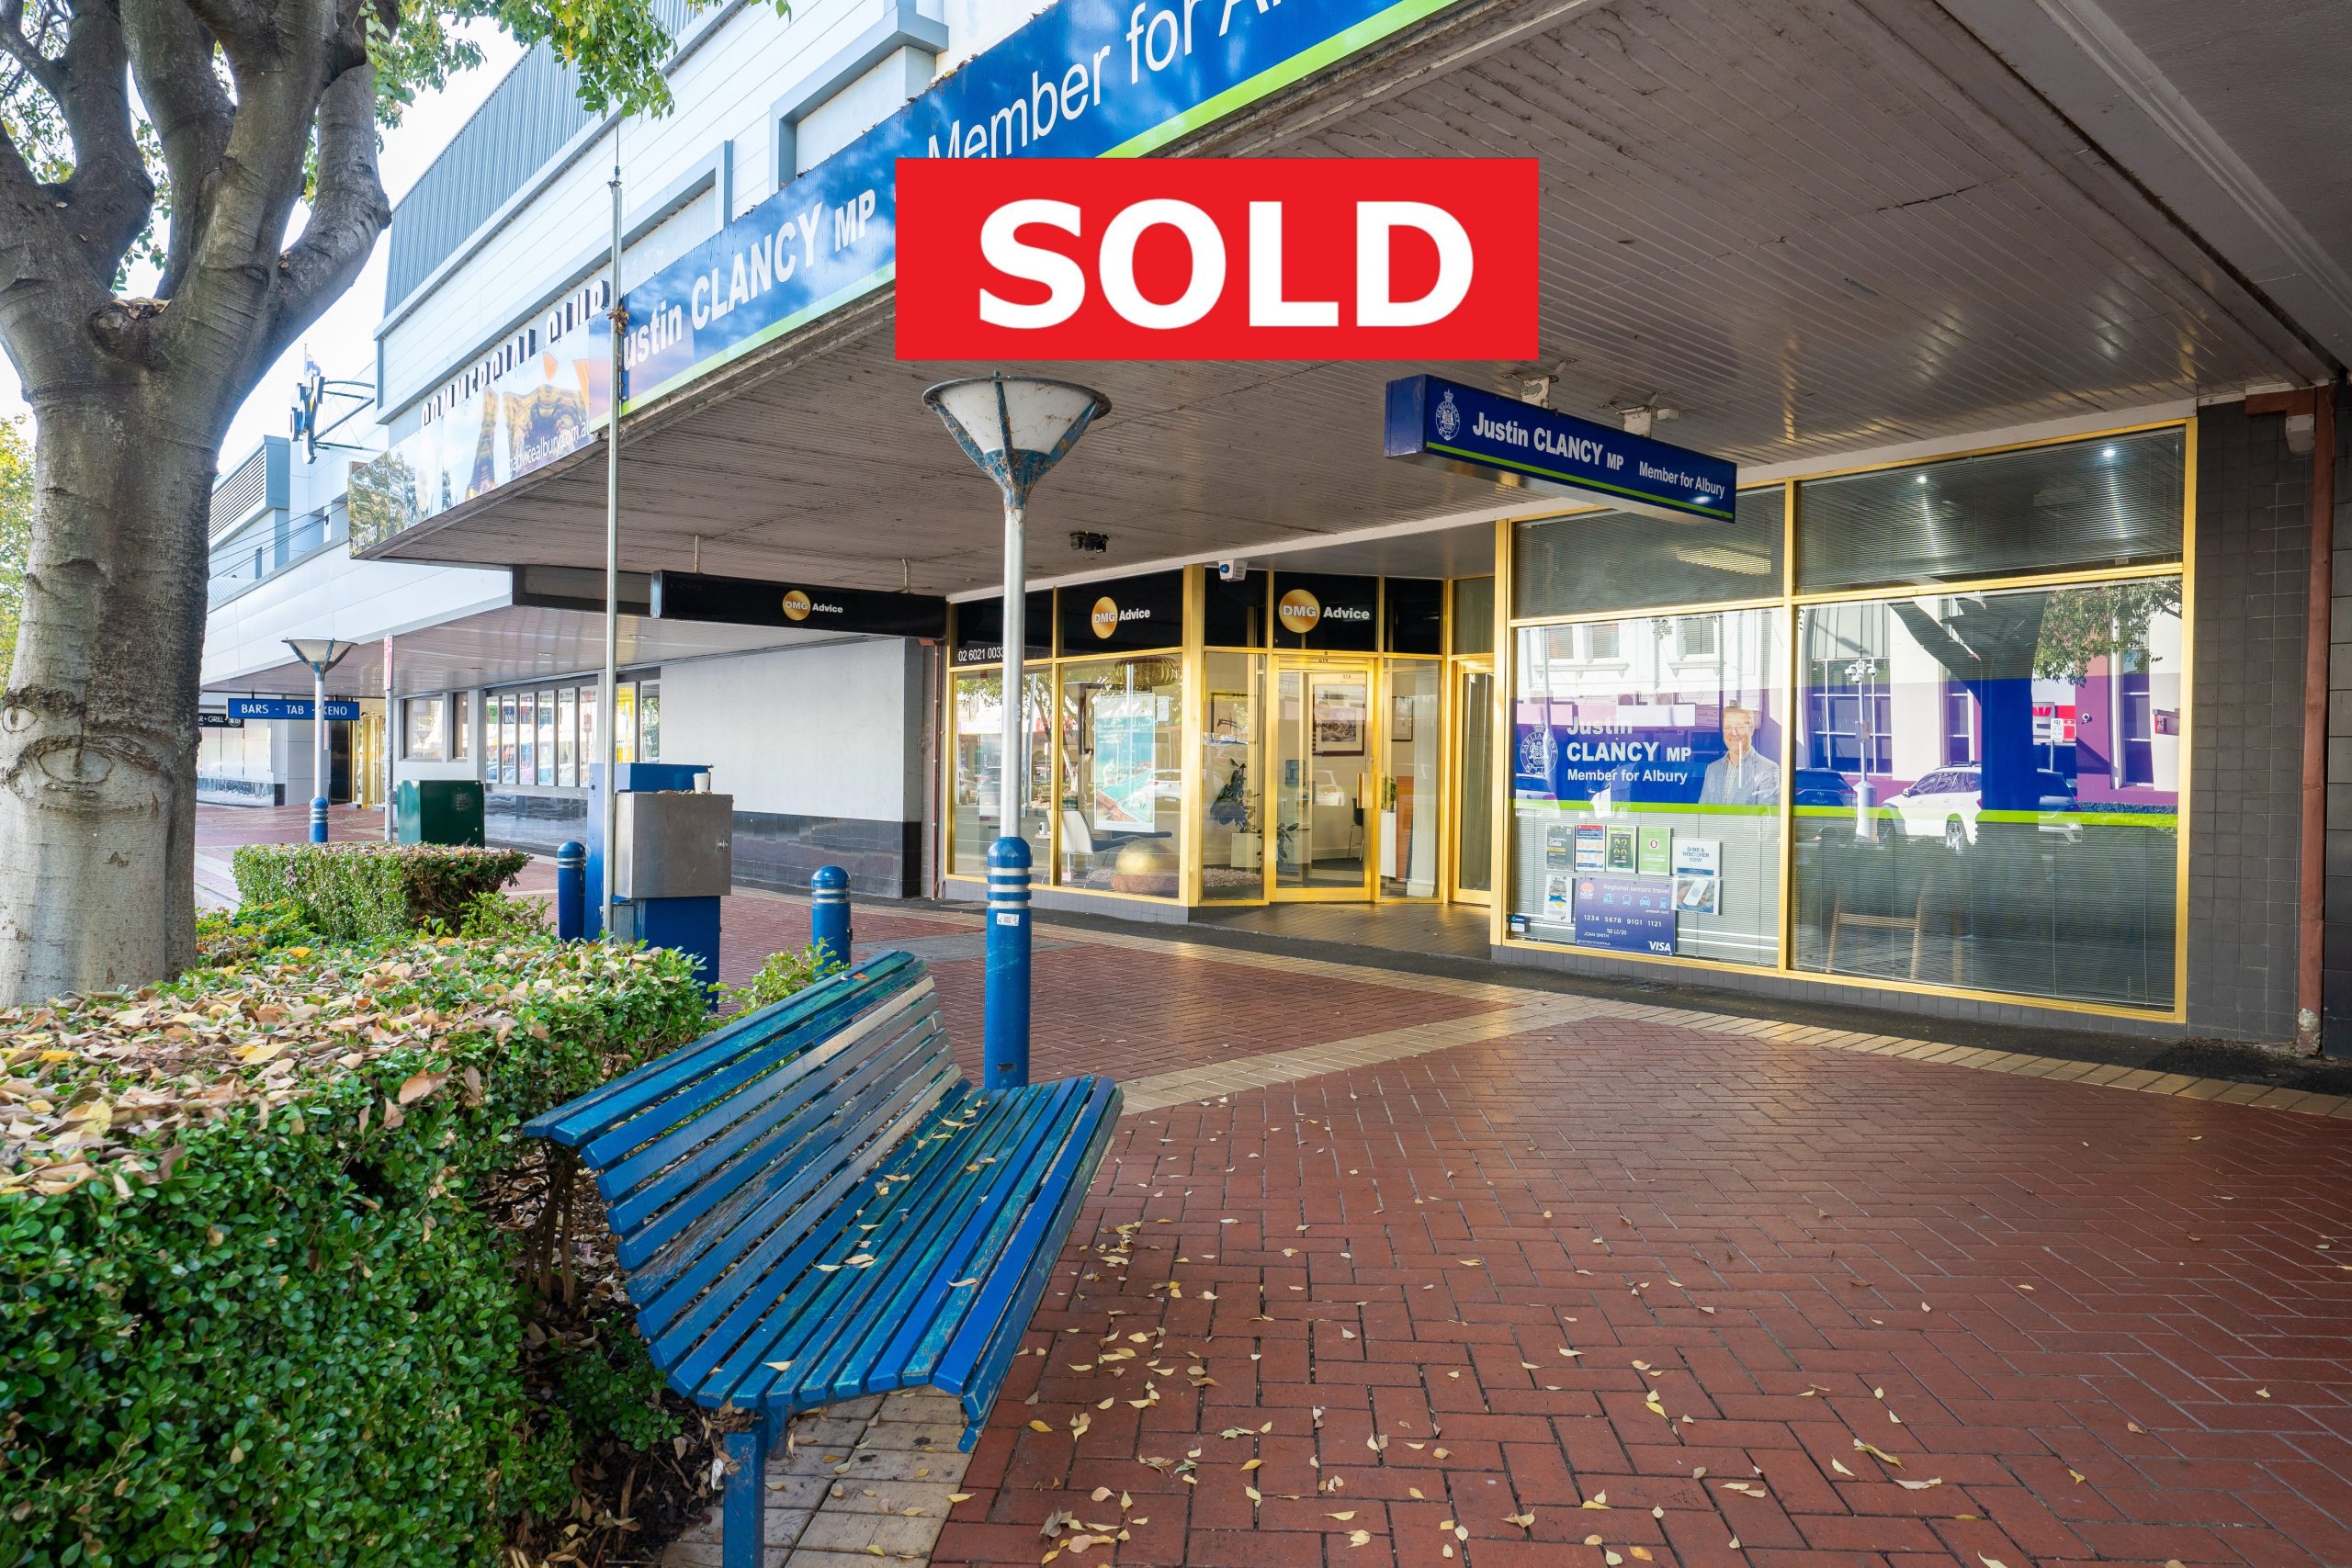 Border MP’s central office building sold